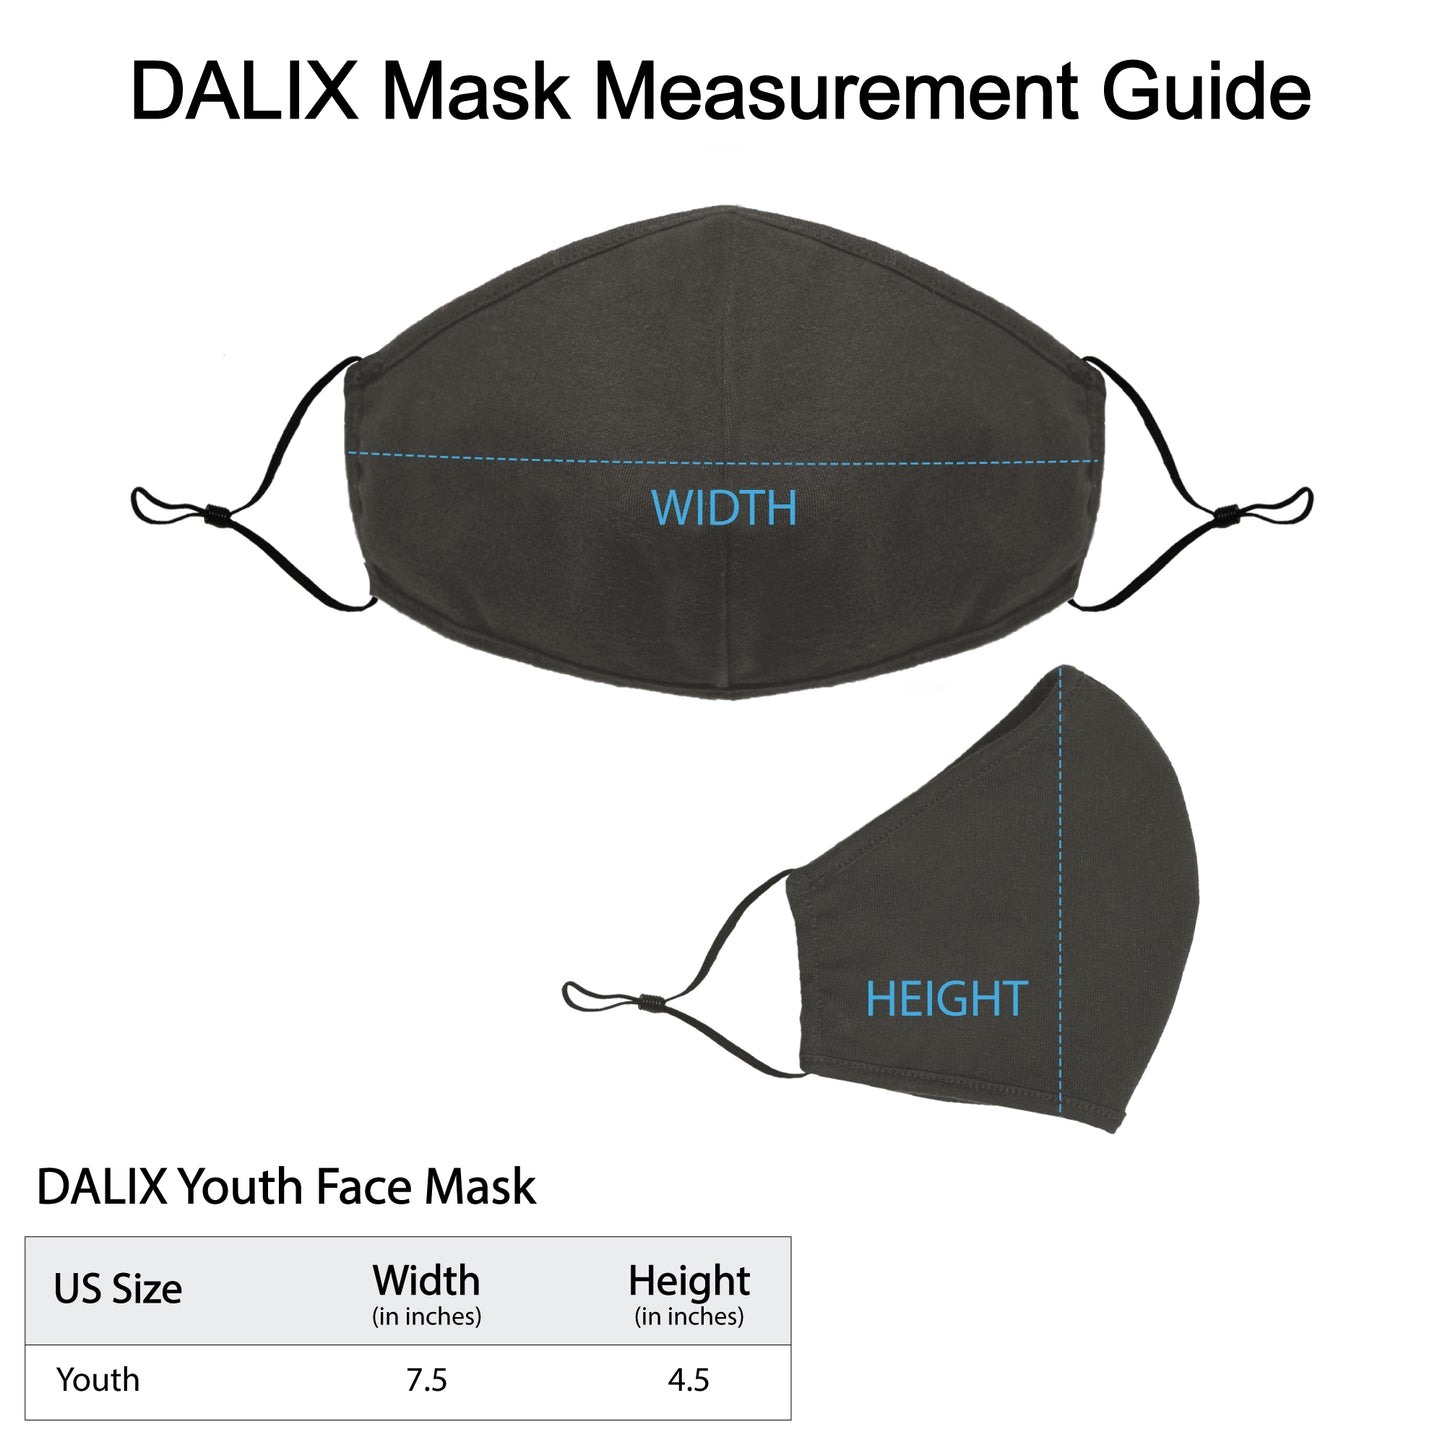 DALIX Kids Cotton Face Mask Reuseable Washable Made in USA - XXS-XS Size 10 Pack